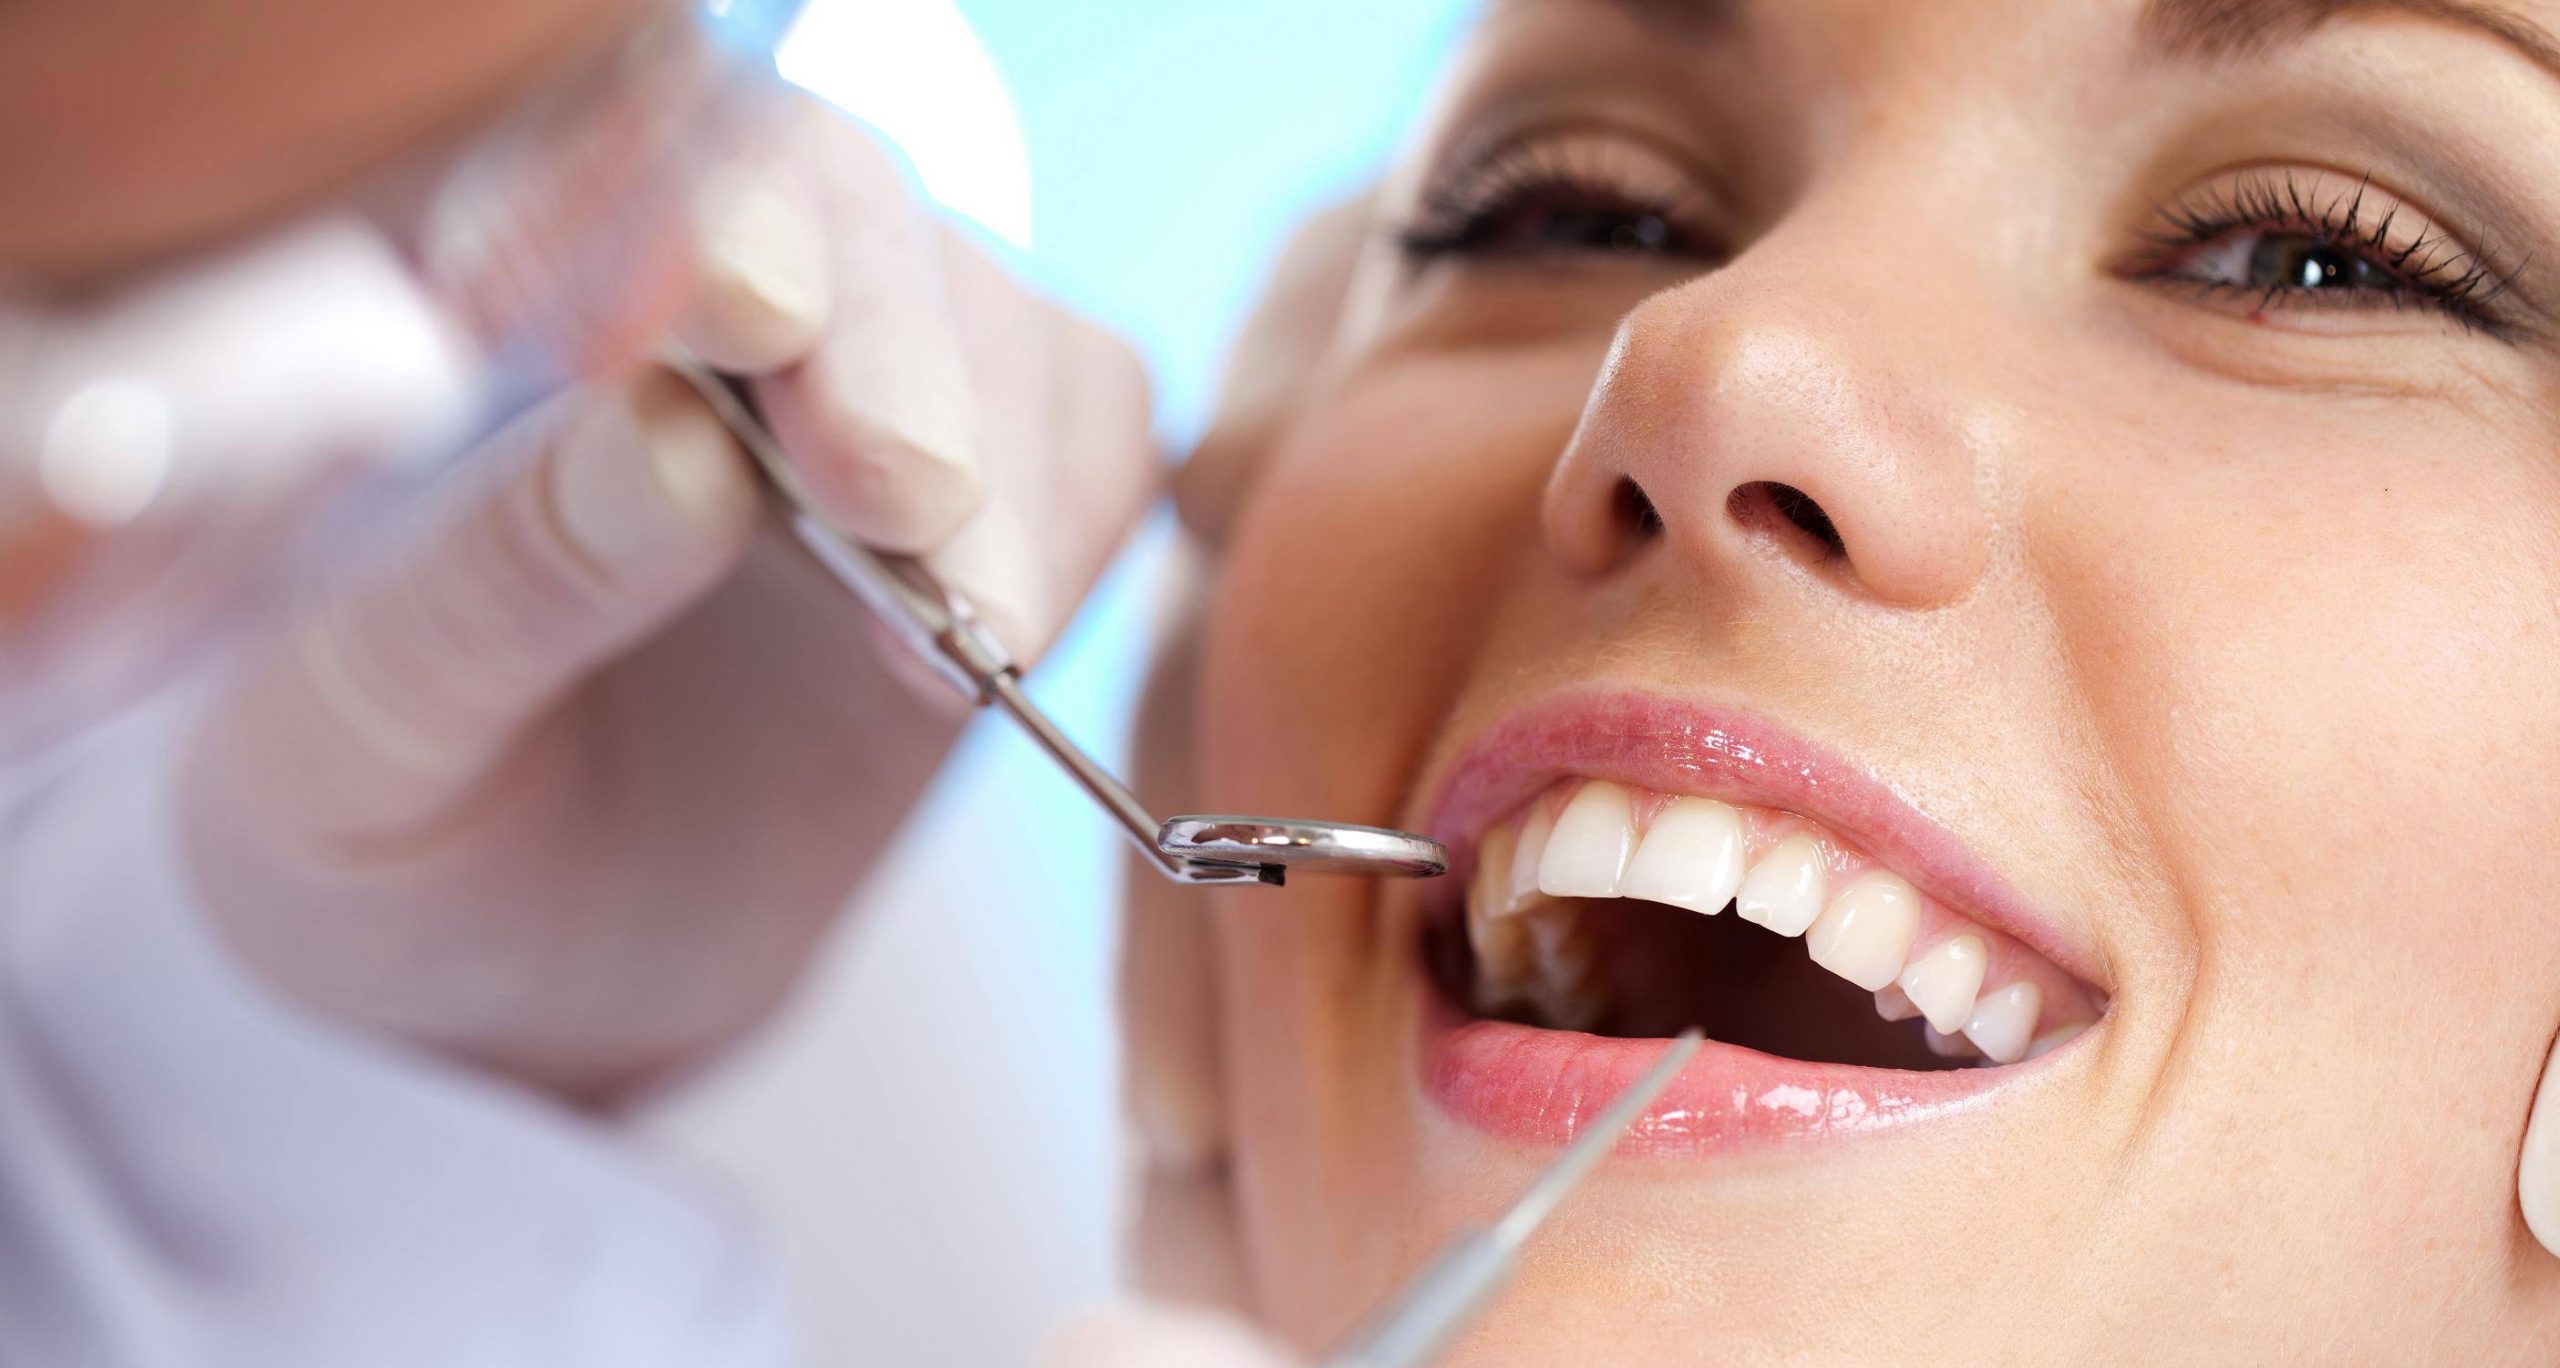 Top Quality Dental Services for Better and Healthy Smiles